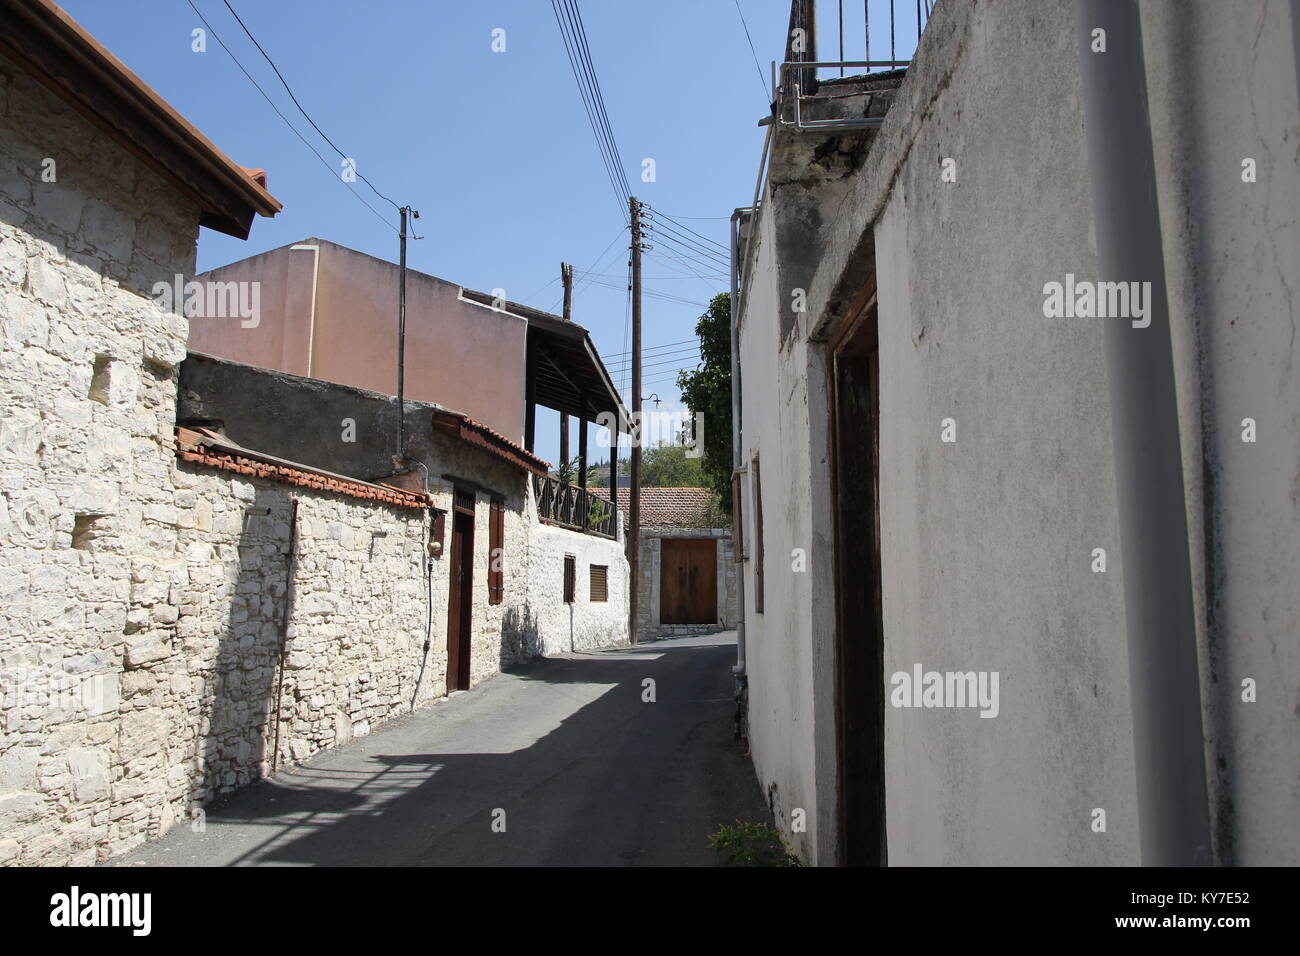 The old winding streets of the authentic Cypriot village Stock Photo